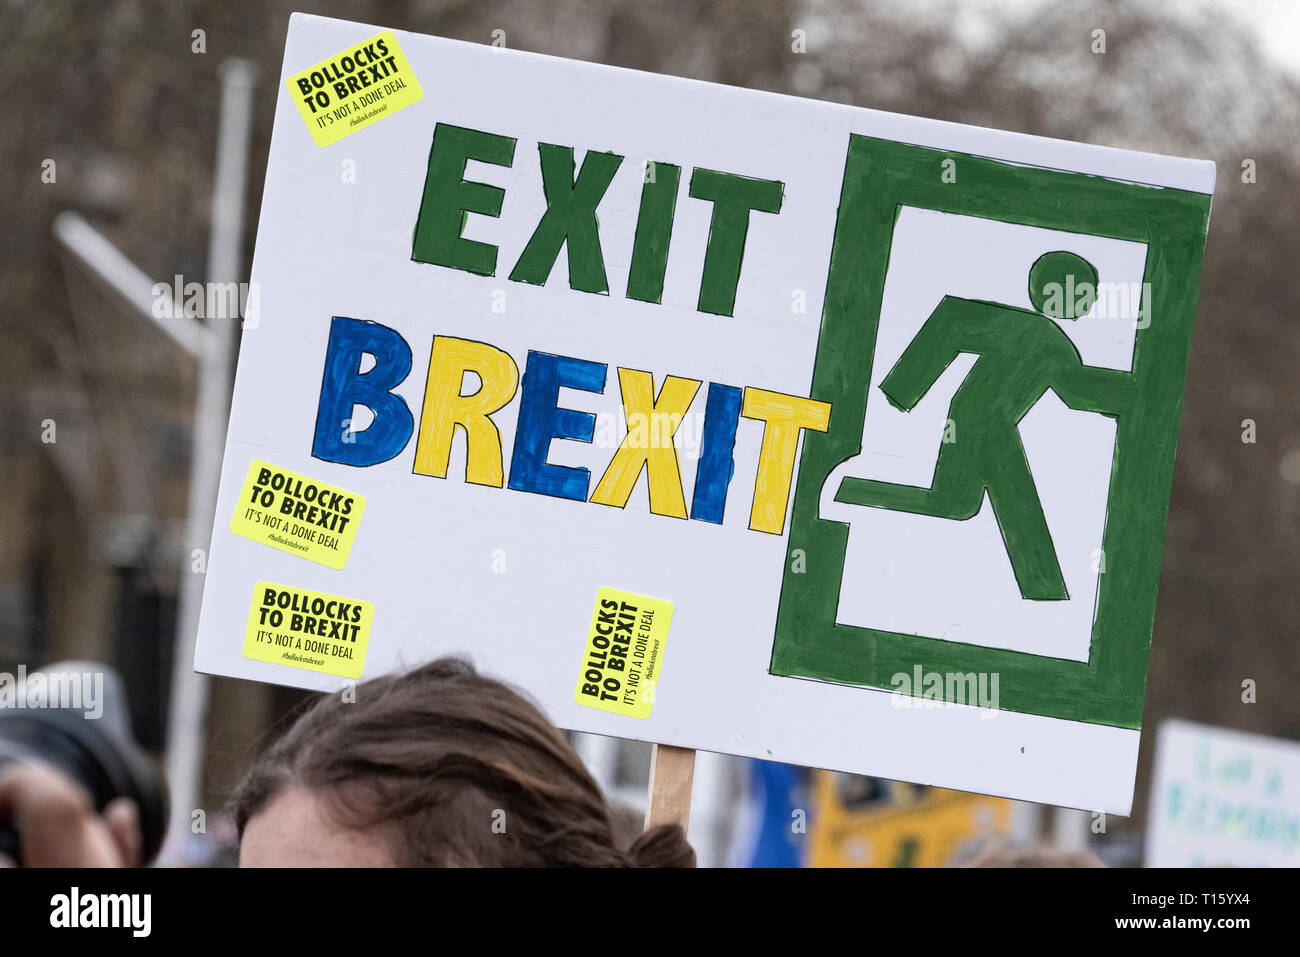 London, UK. 23rd Mar, 2019. Peoples Vote March, Exit Brexit. Crowd detail and banners as taken from the perspective of a protester. Remain banners, second referendum. Credit: Tony Pincham/Alamy Live News Stock Photo